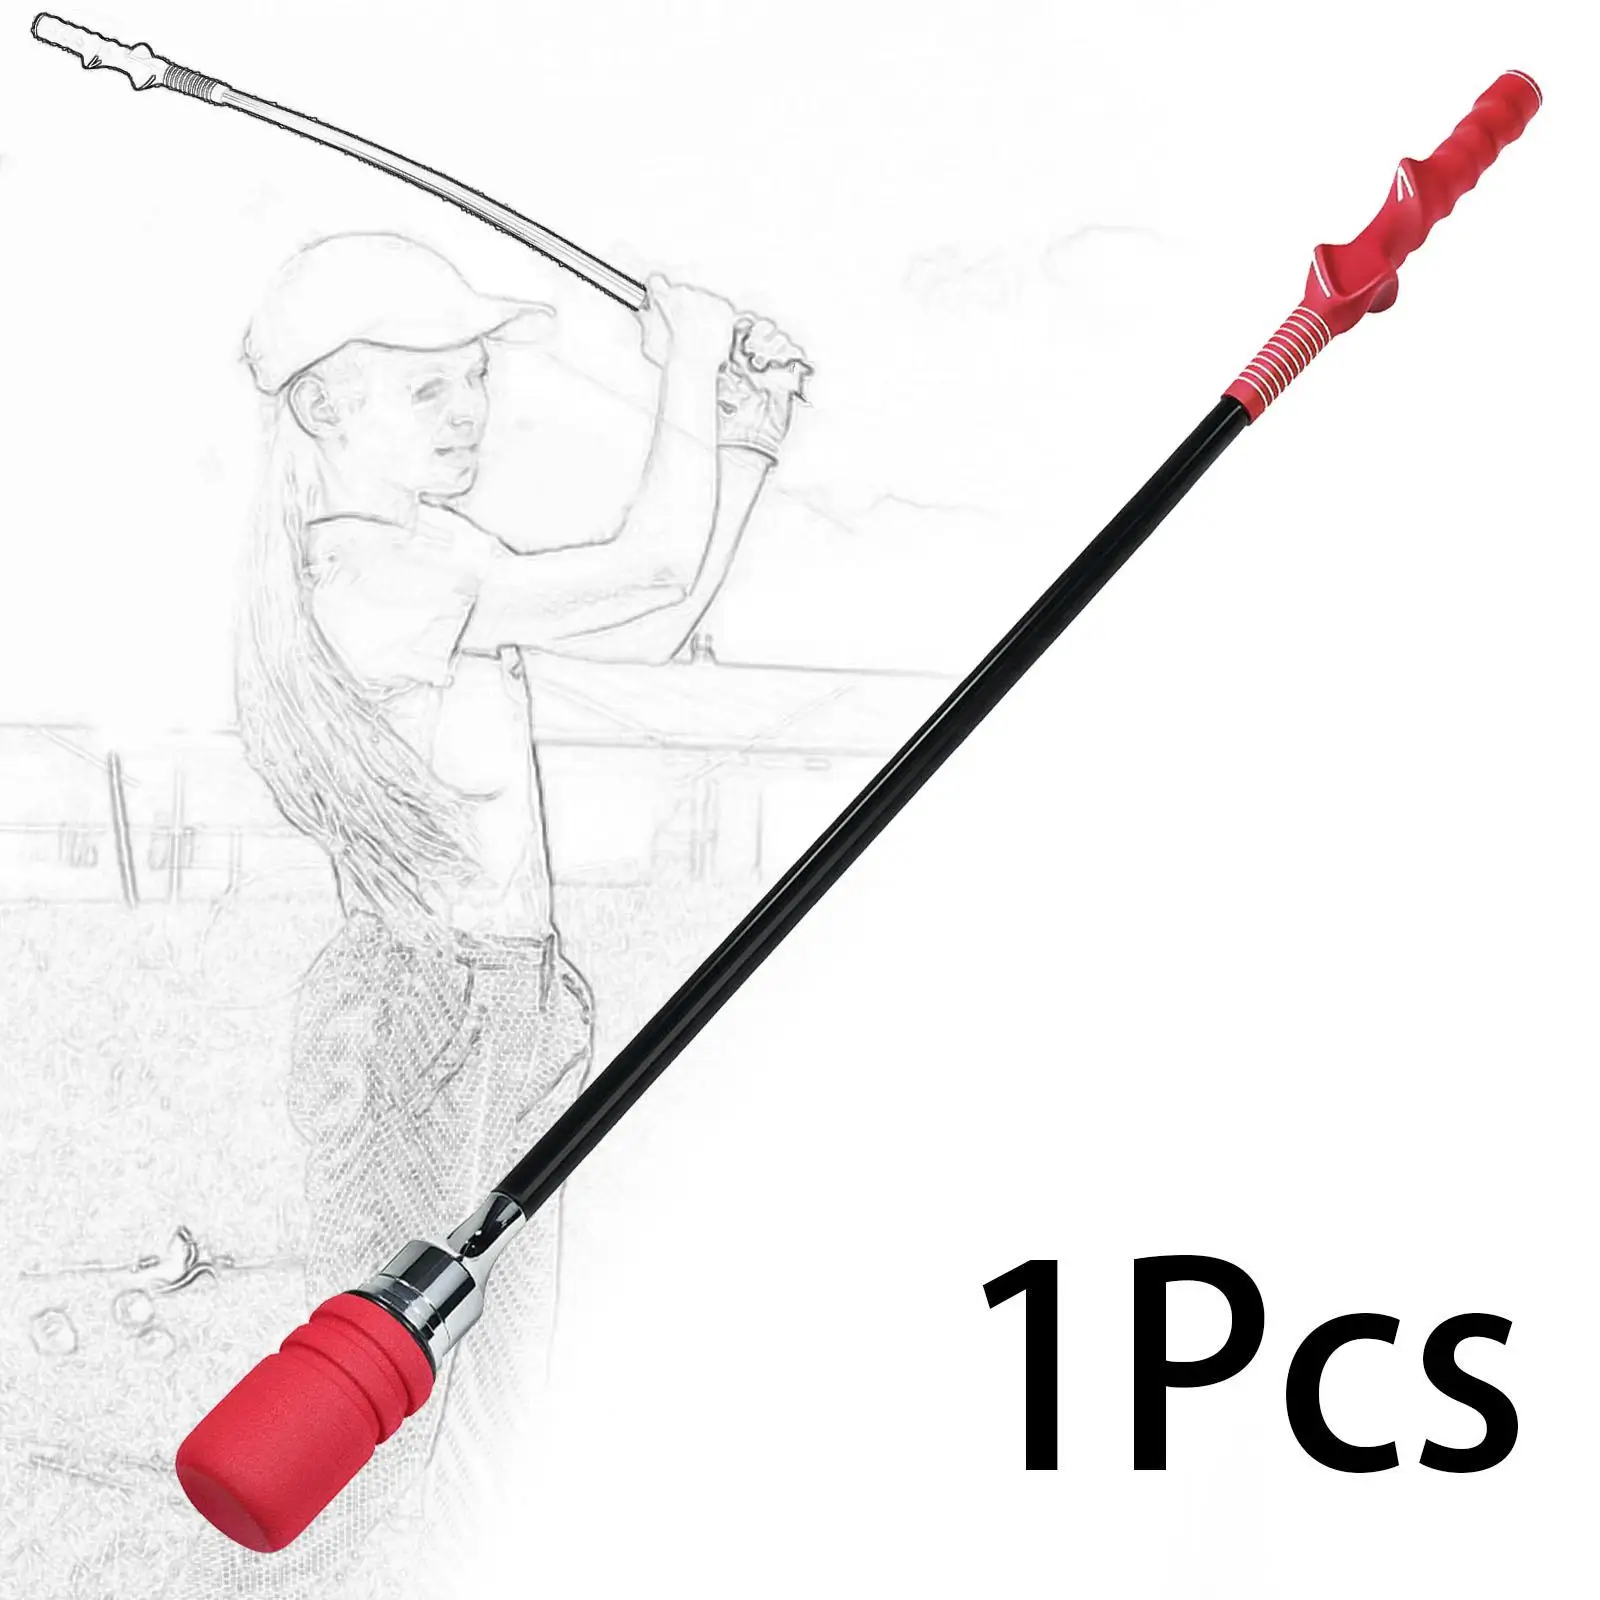 Golf Swing Trainer, Golf Practice Rod for Women Men, Golf Training Aid, Golf Warm up Rod for Position Correction